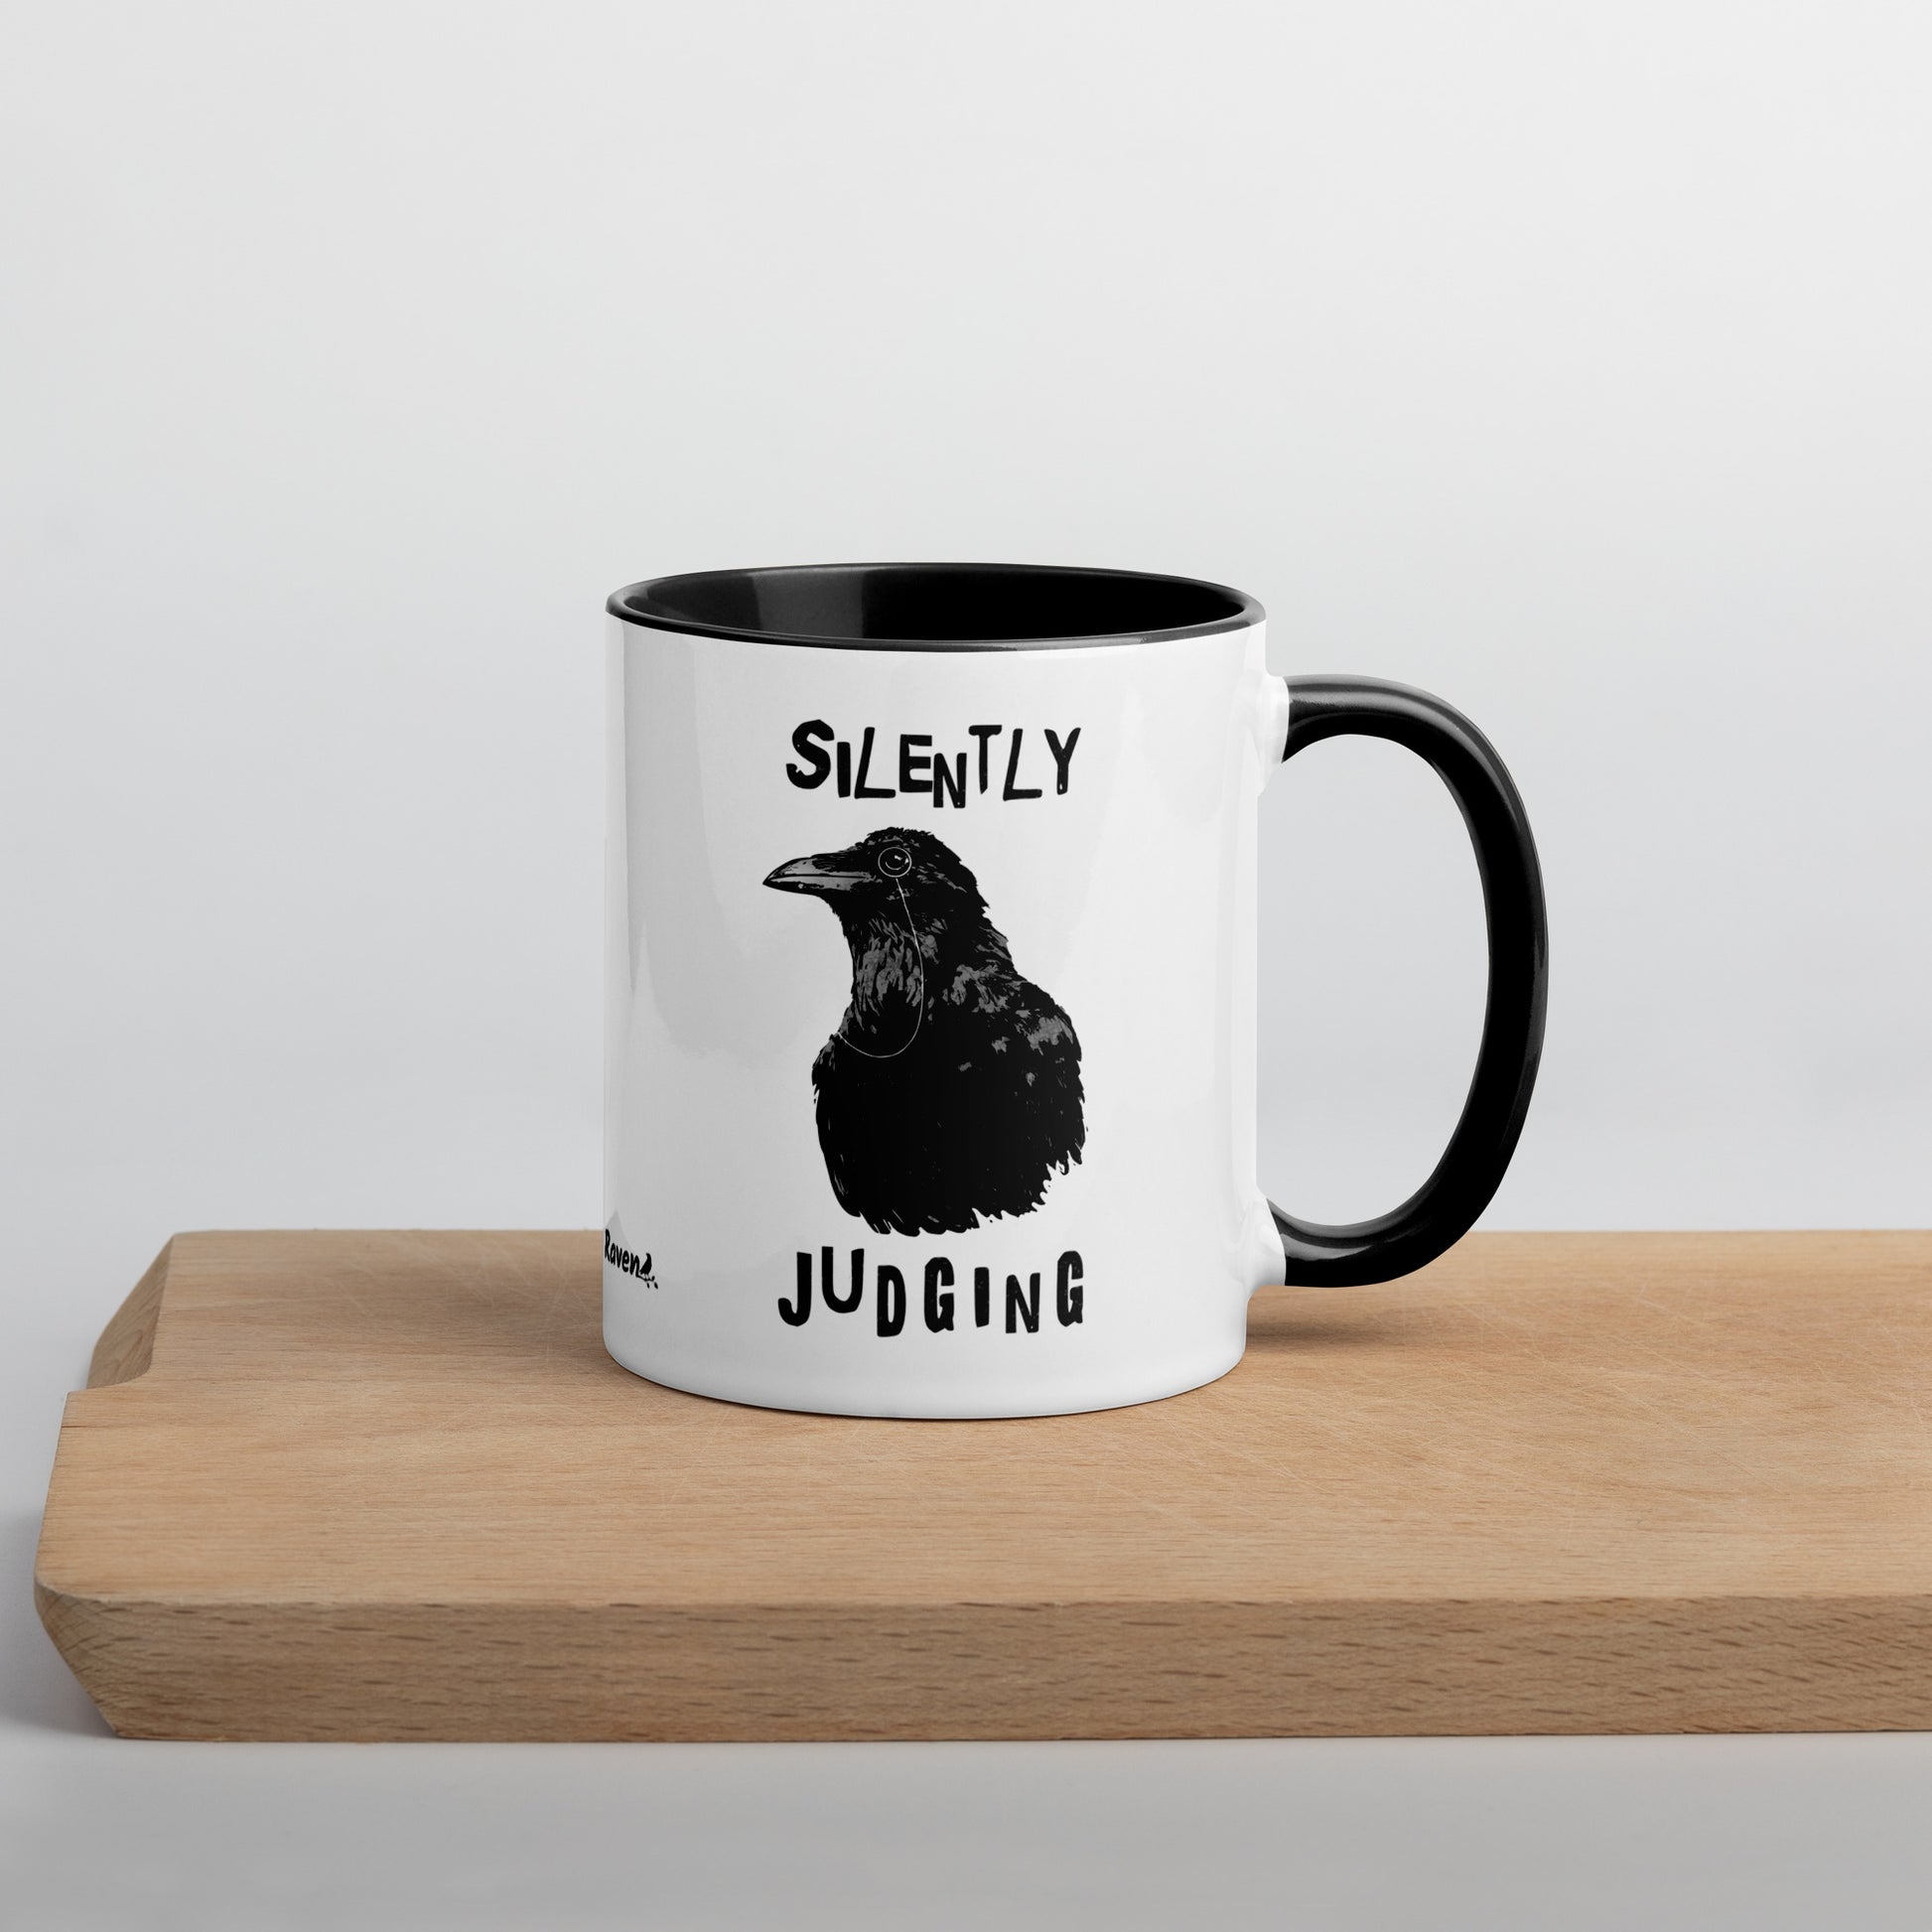 11 ounce ceramic mug with Silently Judging text surrounding a monacle-wearing crow. Double-sided design. Mug has black rim, handle, and inside. Shown sitting on wooden cutting board with handle facing right.